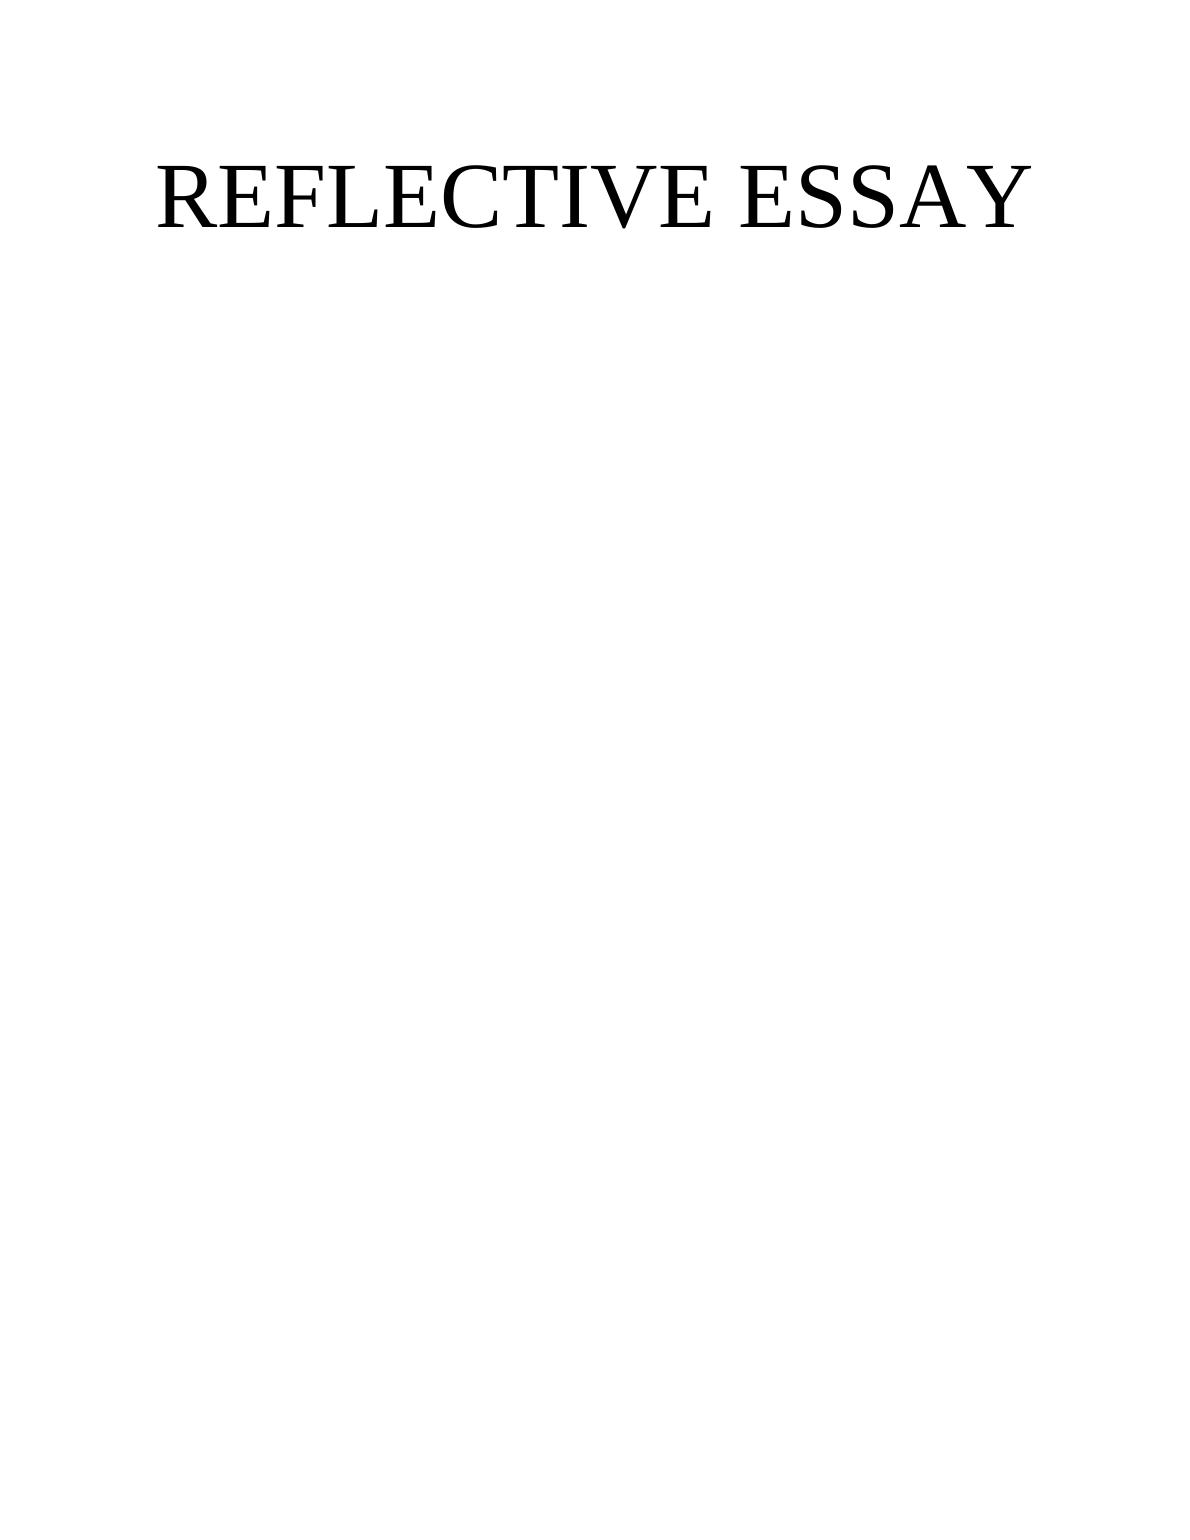 Reflective Essay on Academic Development and Future Challenges_1